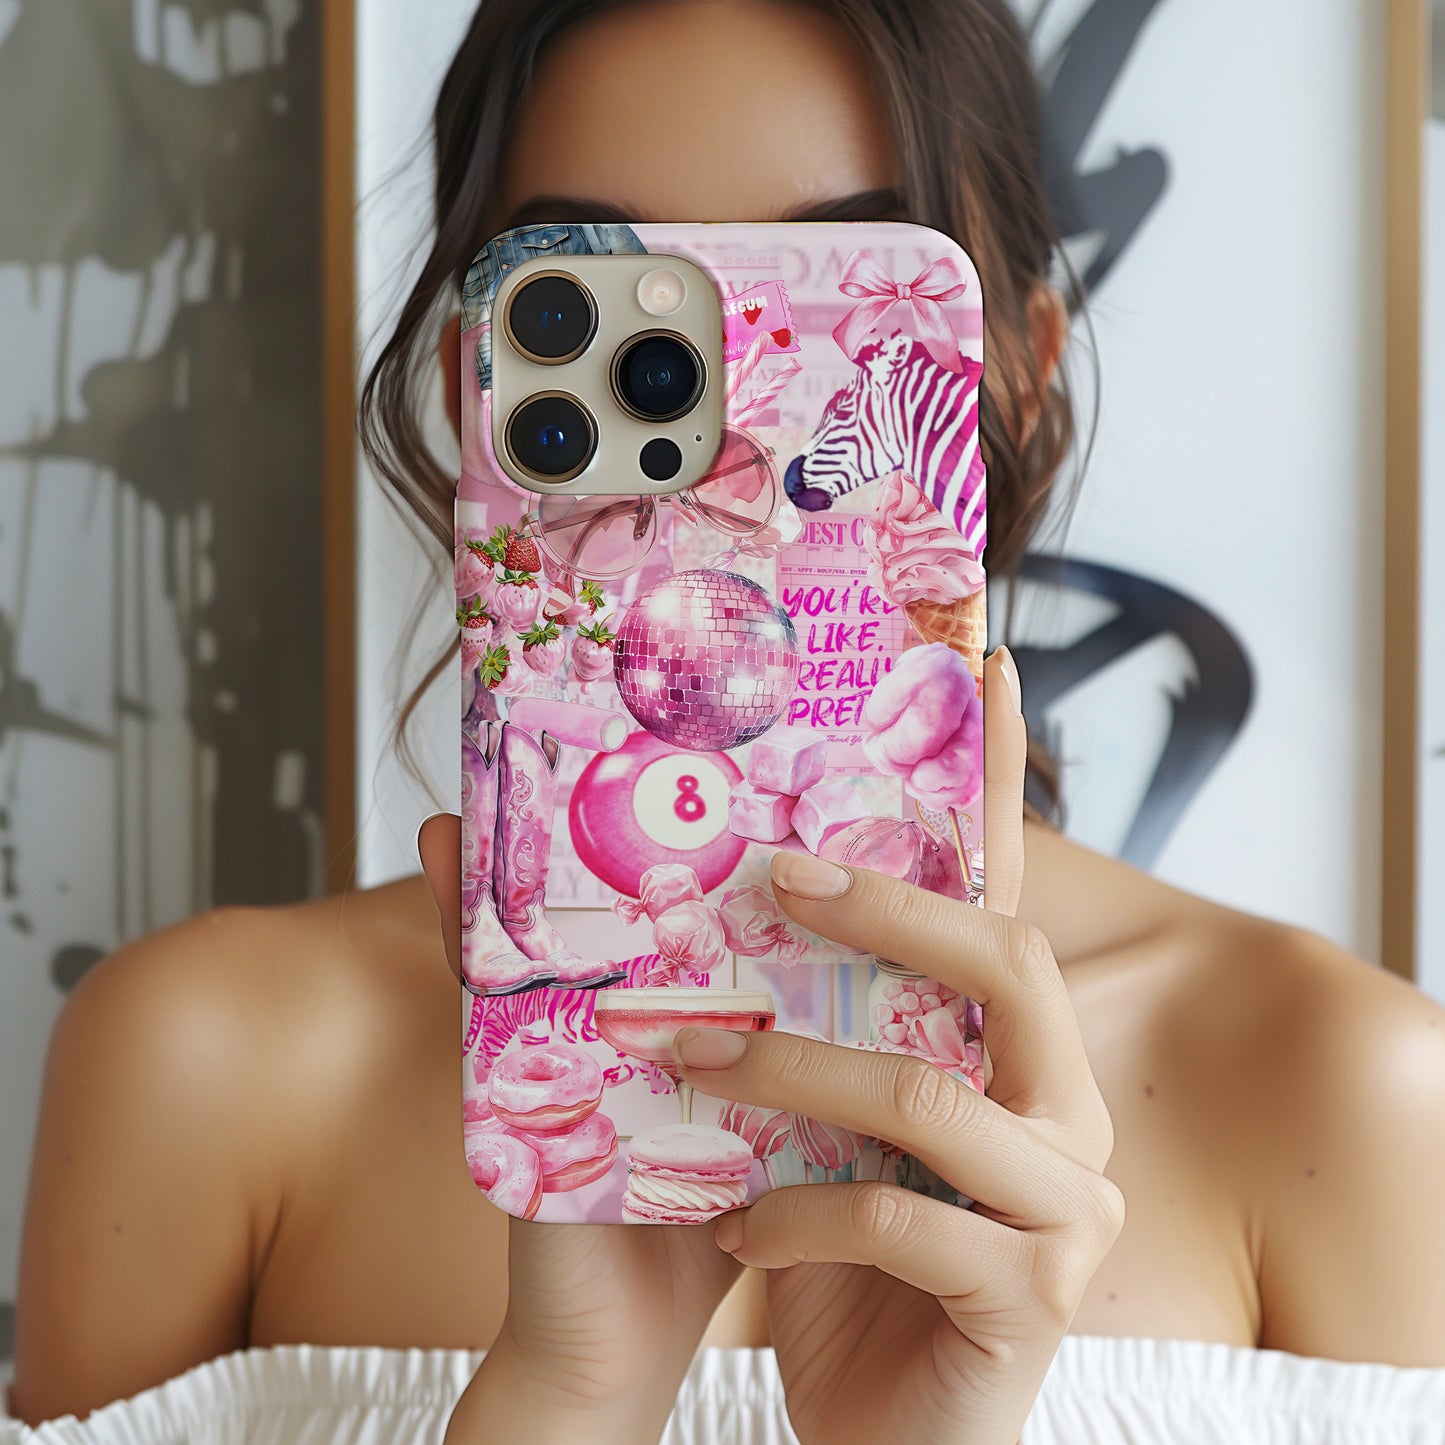 Girl Holding Pink Collage Phone Case Watercolor scrapbook style with pink images including pink zebra, disco ball 8 ball, cowgirl boots, candy, sweets and bubble gum. Phone cover by Artscape Market